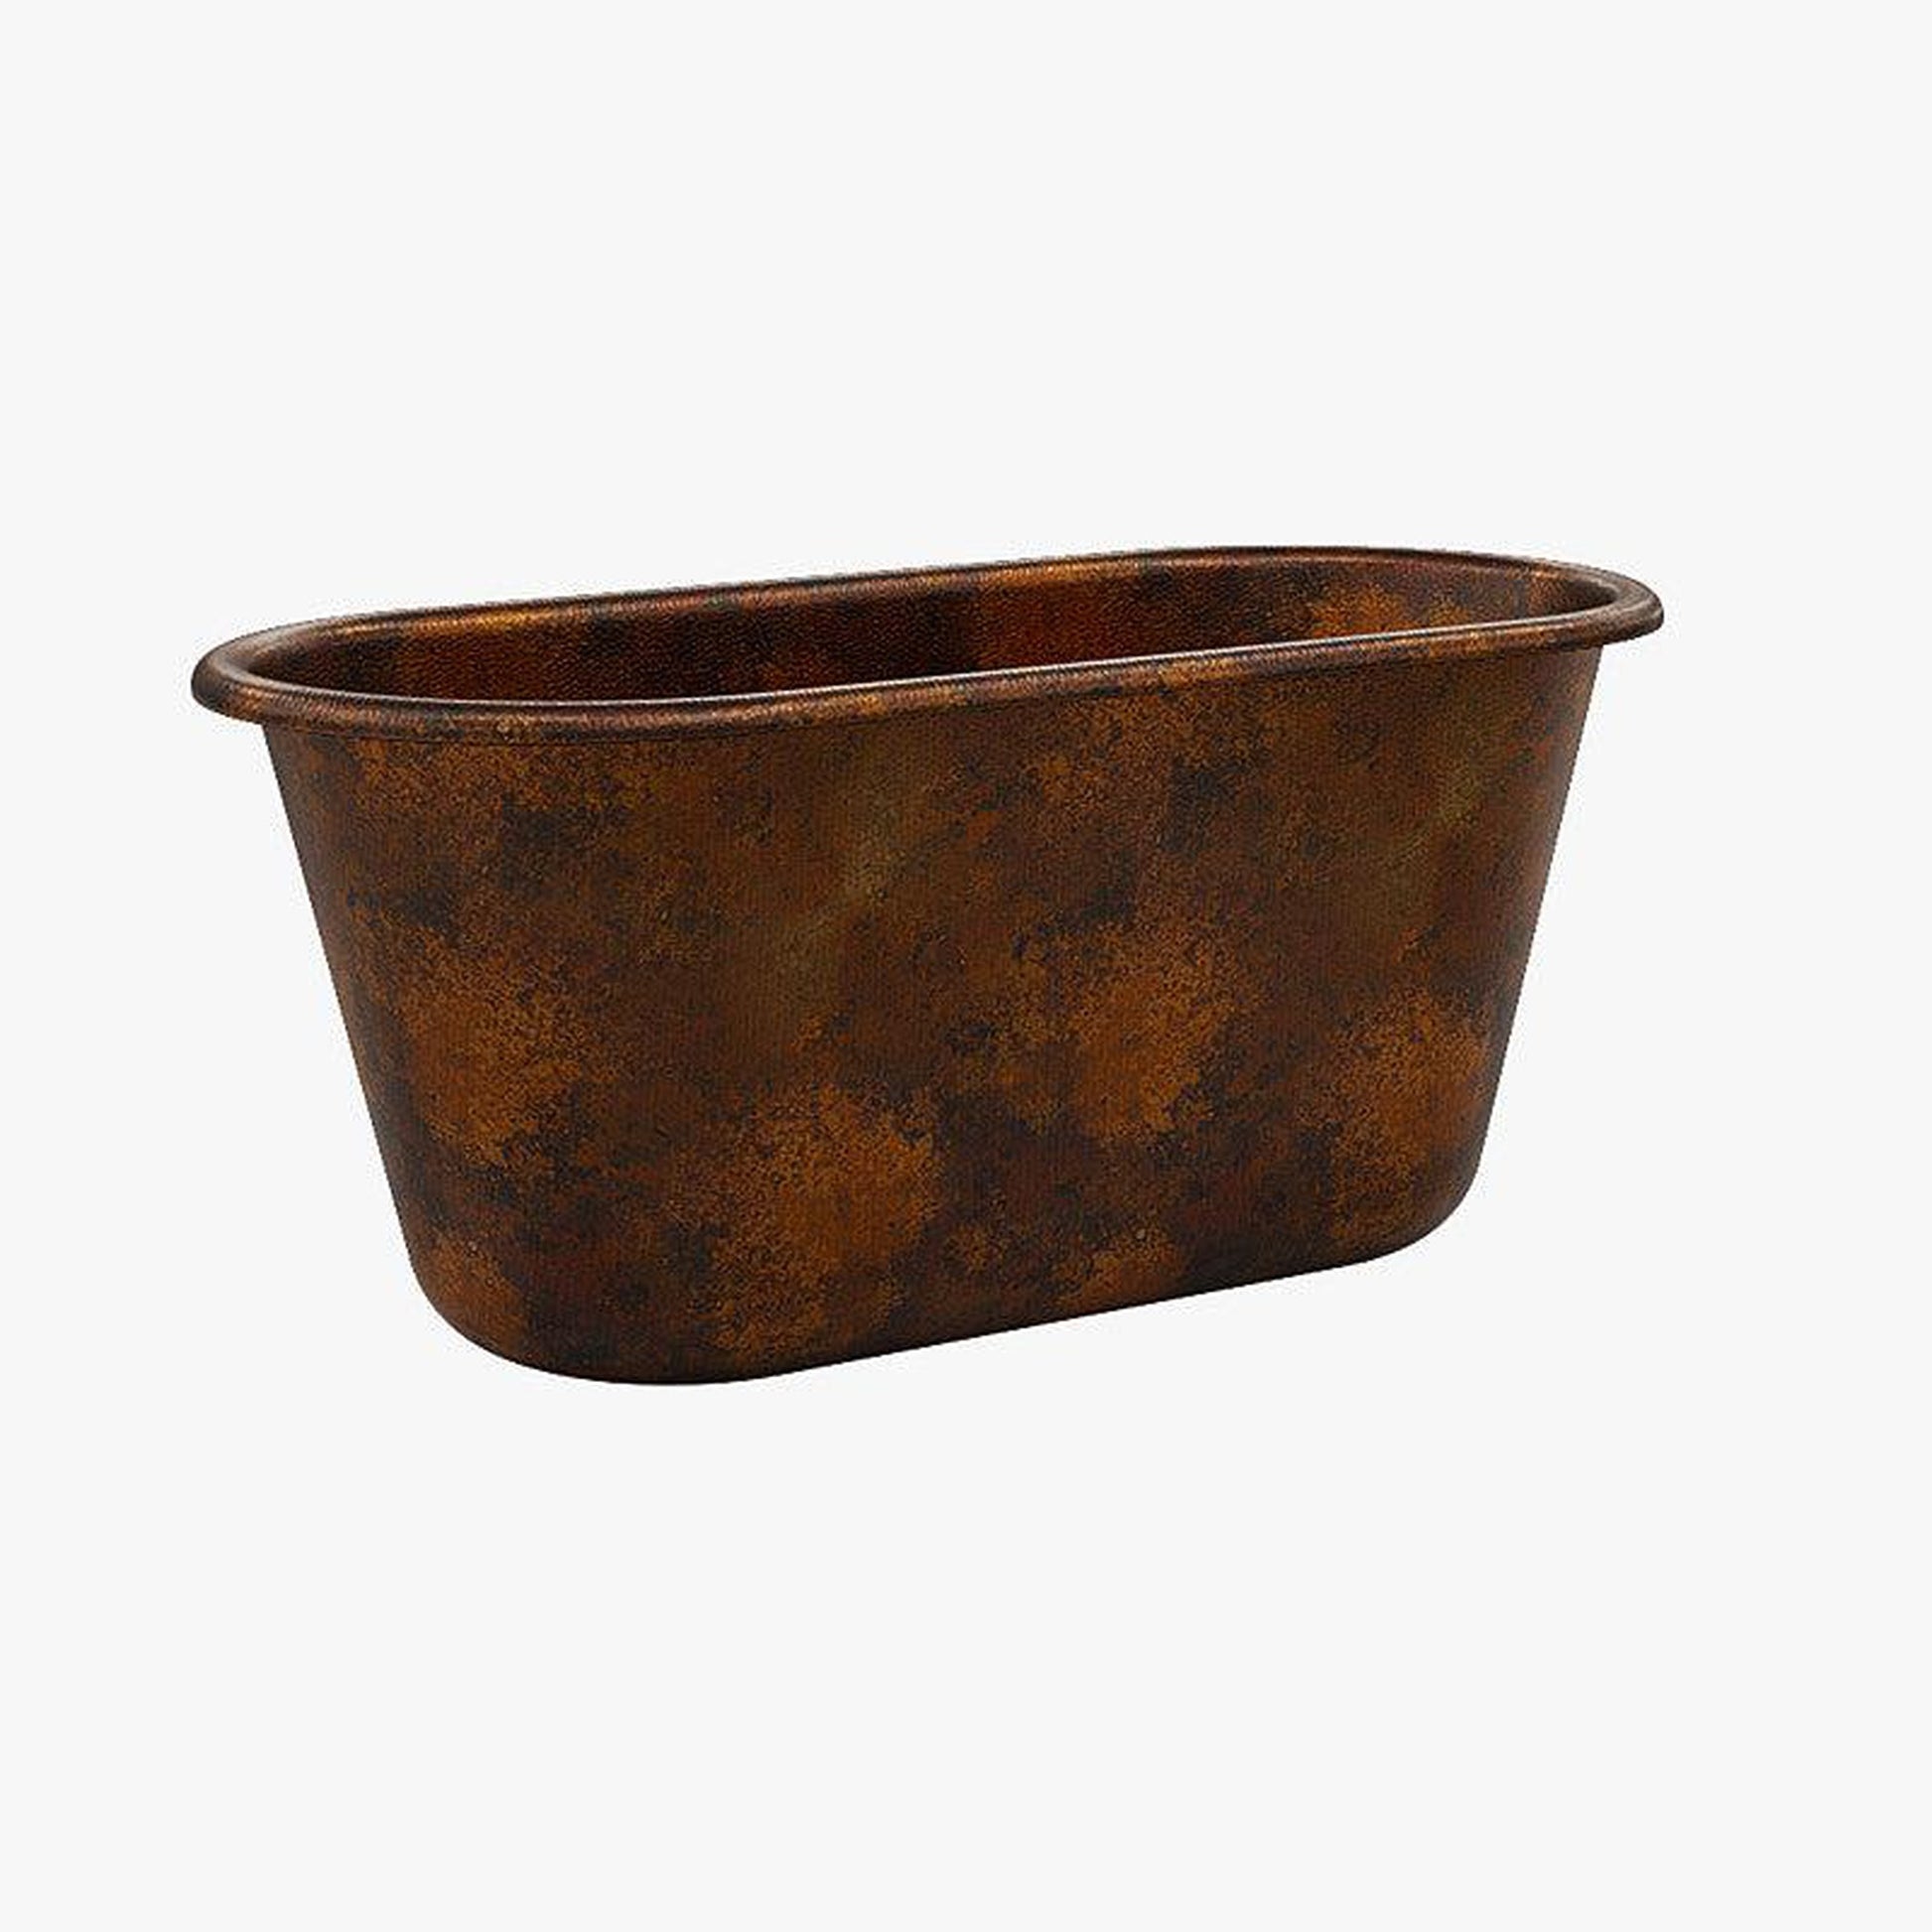 CopperSmith Heritage HX1 64" x 31" x 31" 16-Gauge Fire Copper Freestanding Bathtub With Fire Copper Interior and Polished Brass Push Button Tub Drain